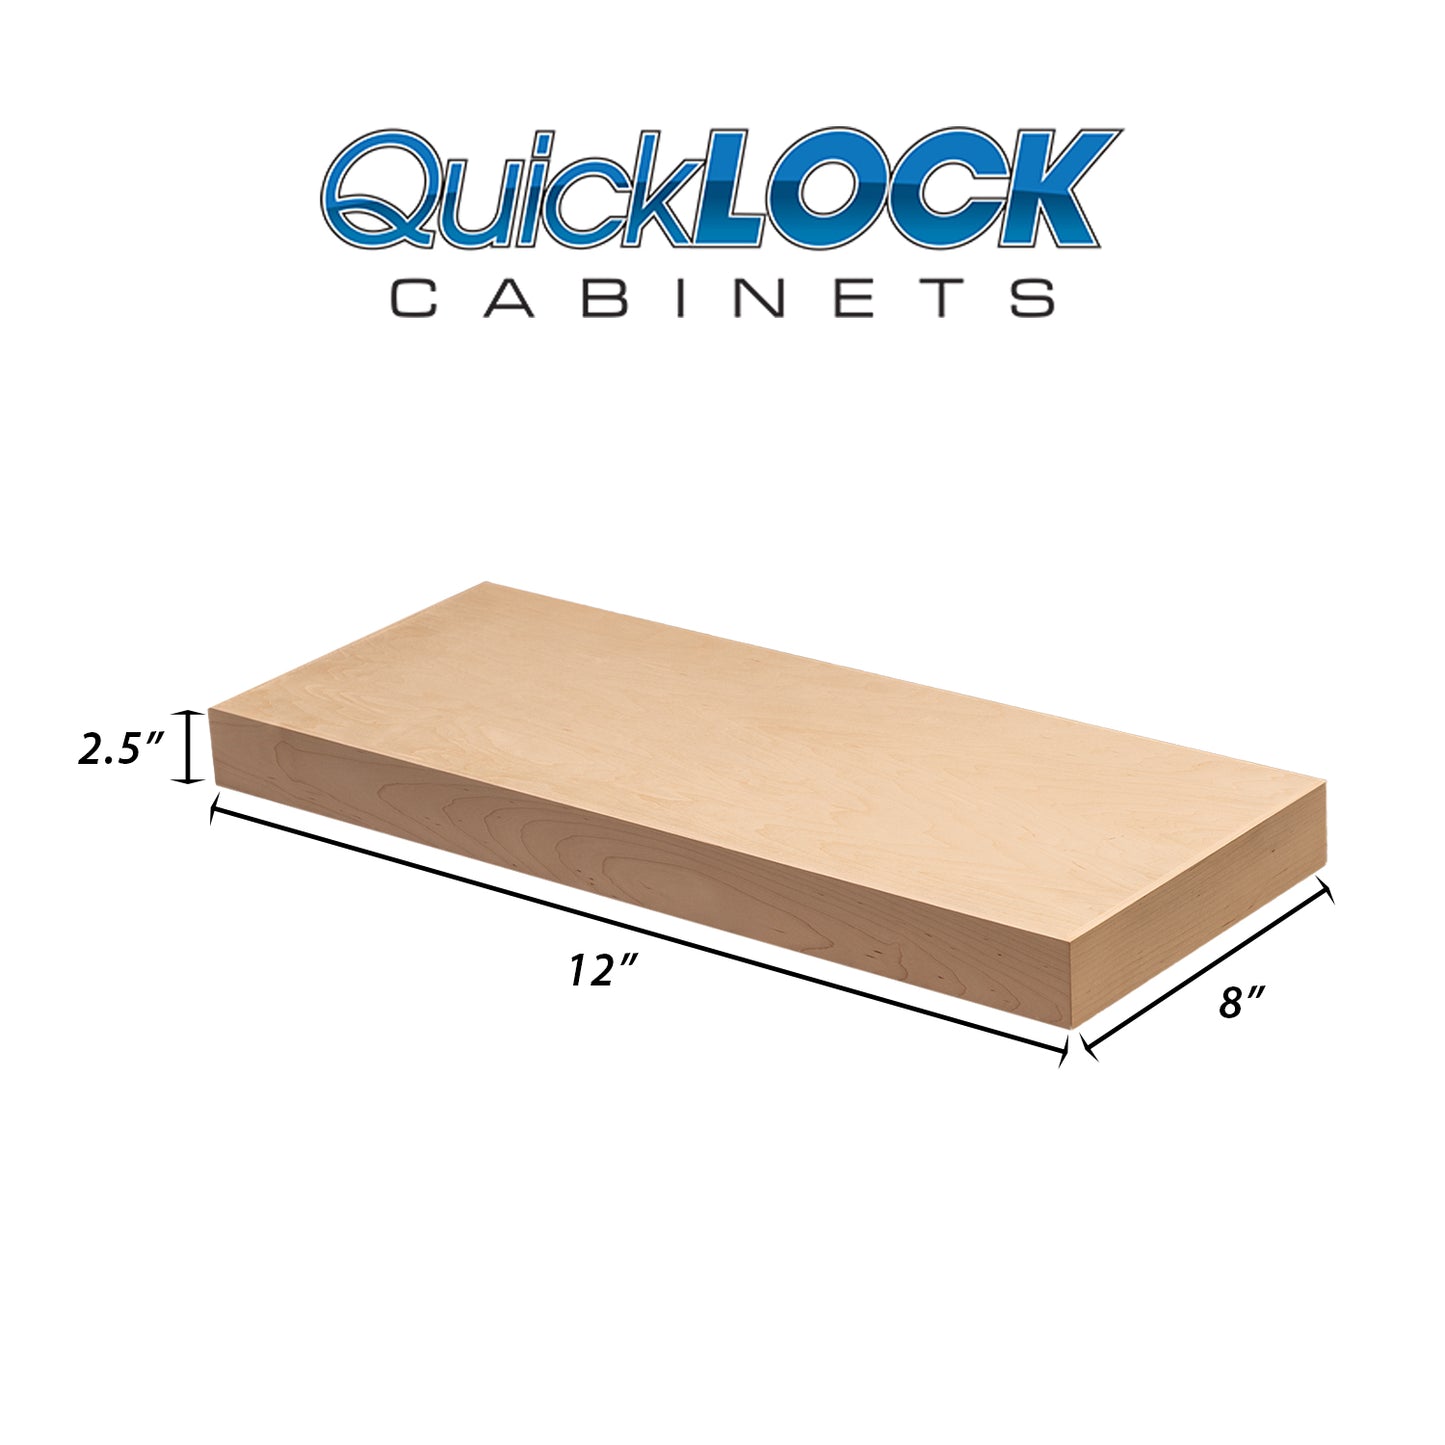 Quicklock Cabinets Floating Shelves | 2.5" Thick | Raw Maple, 8" D x 12" W x 2.5" H | American Made | Hardwood Bracket | Complete Shelf Unit